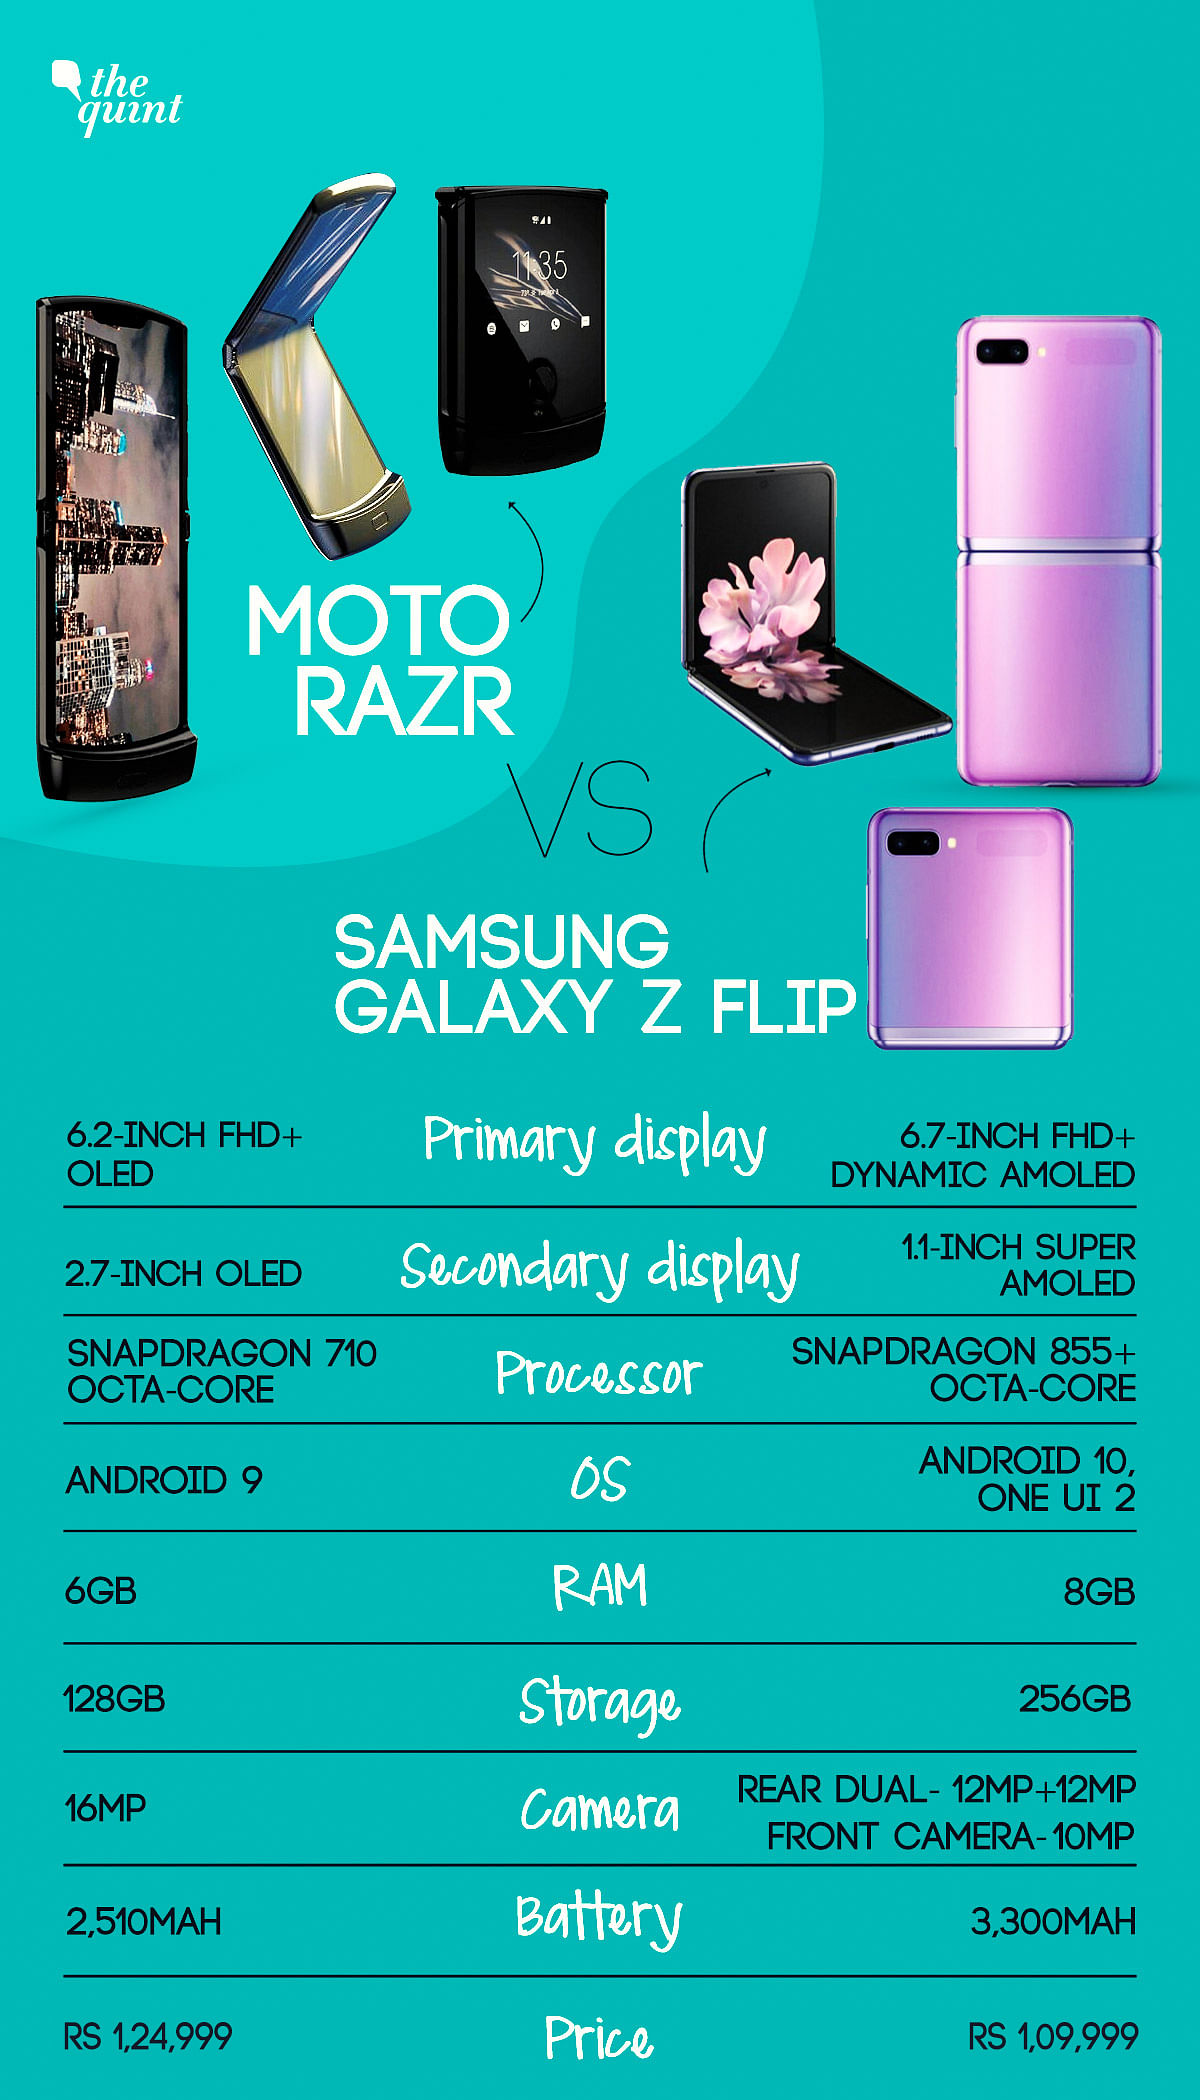 Both the Moto Razr and the Galaxy Z Flip do not come with any dust or water resistance certification. 